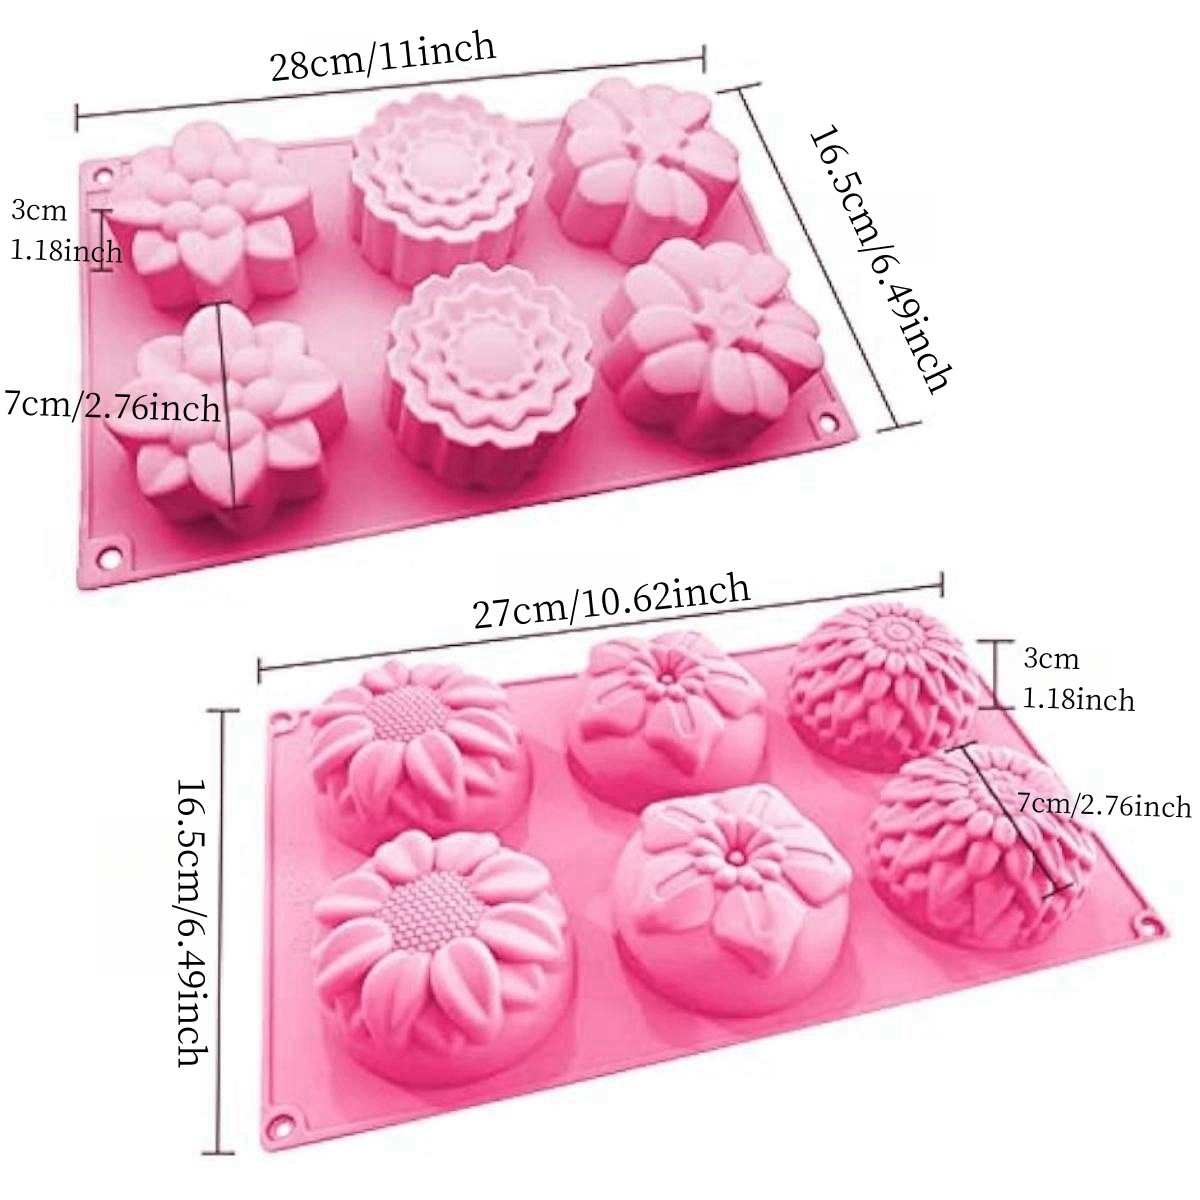 Soap Mold 4 Cavity Silicone DIY Silicone Baking Molds Shapes